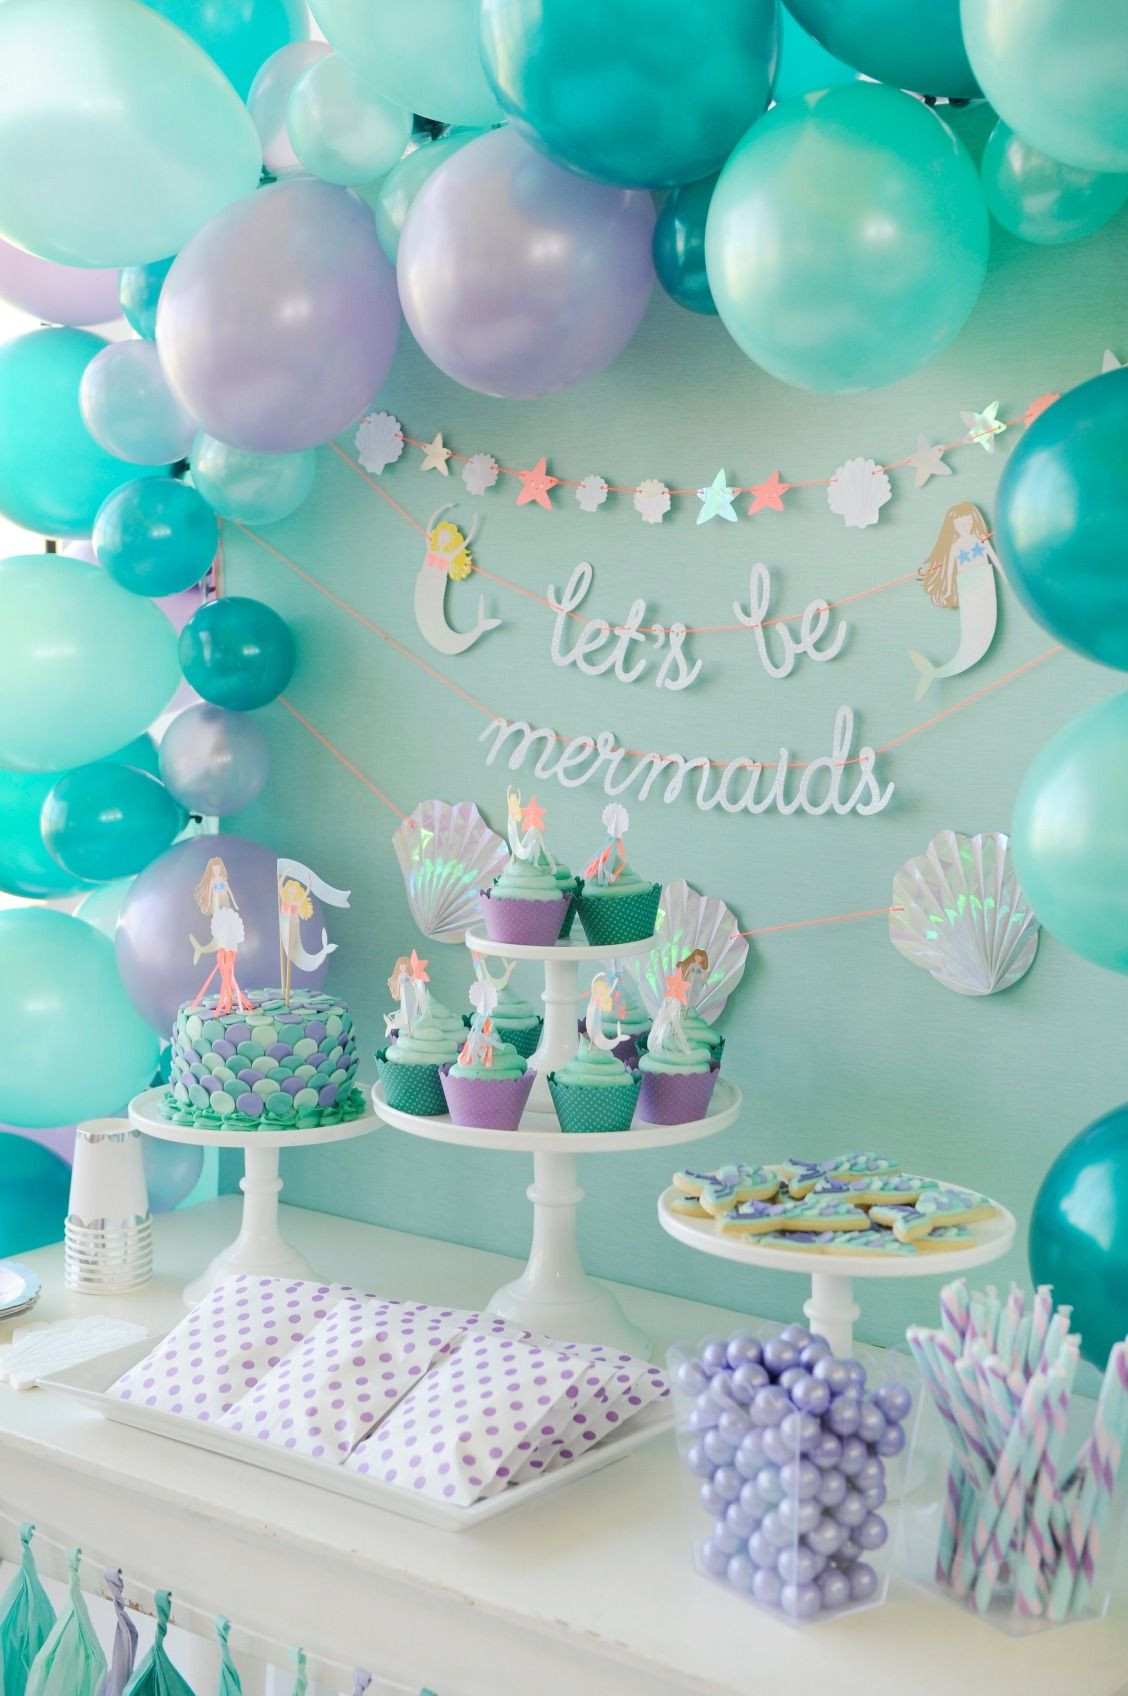 Mermaid Party Ideas Pinterest
 New Party Collection Let s Be Mermaids